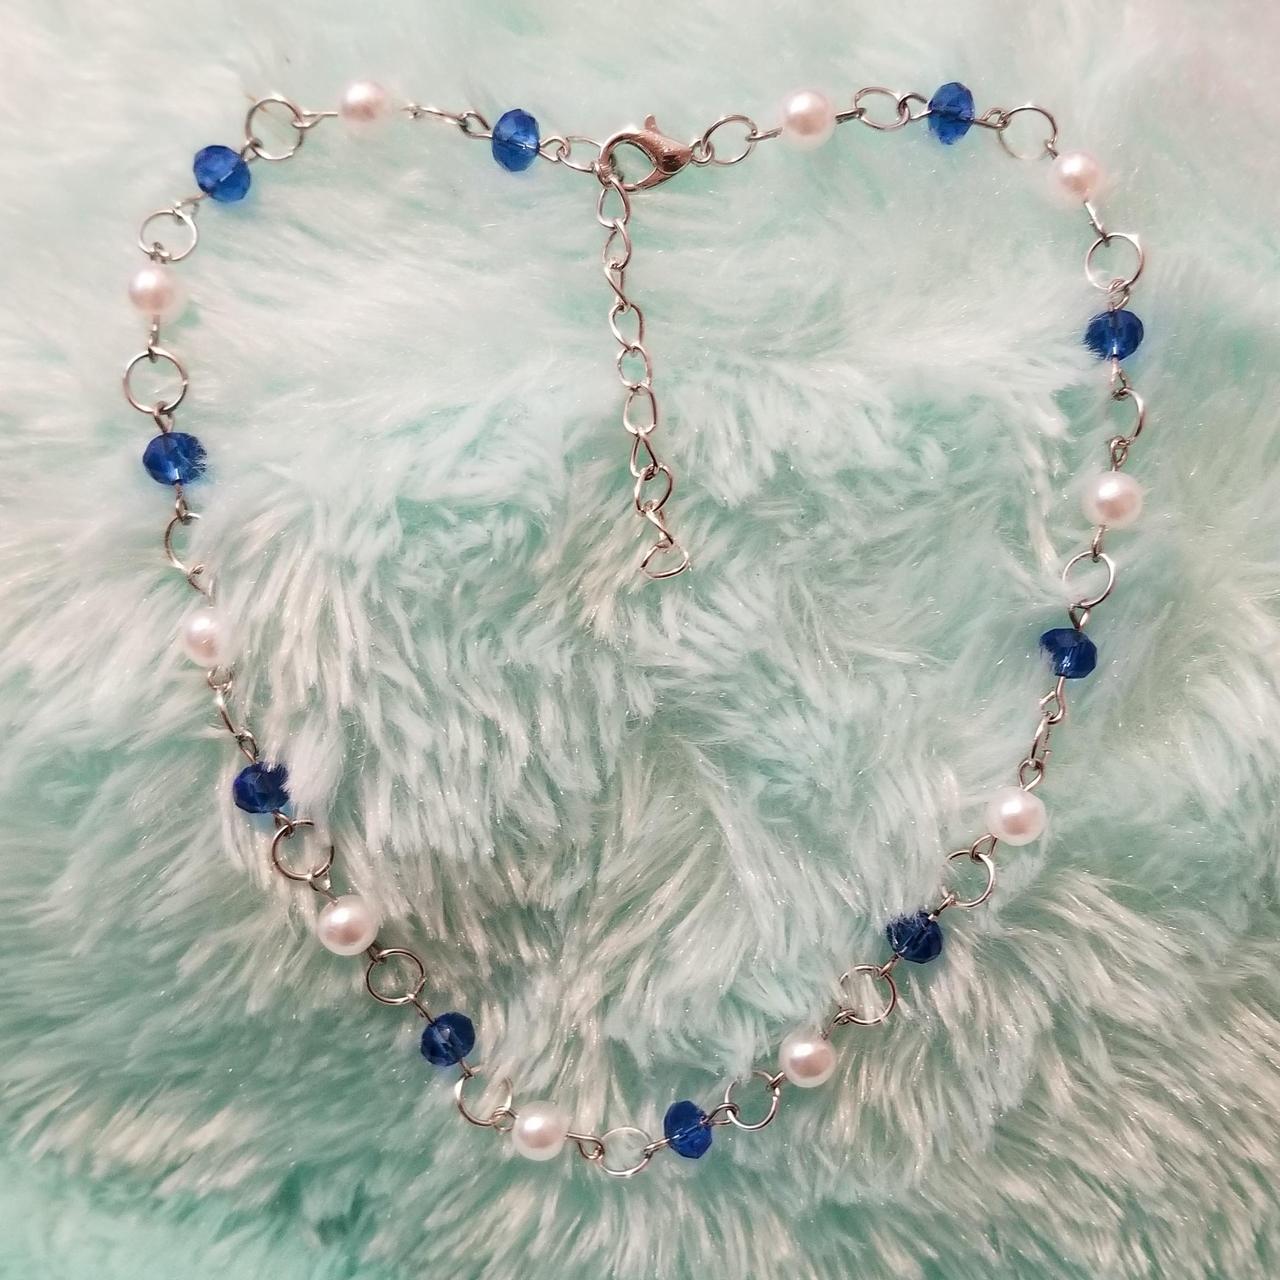 Women's White and Blue Jewellery